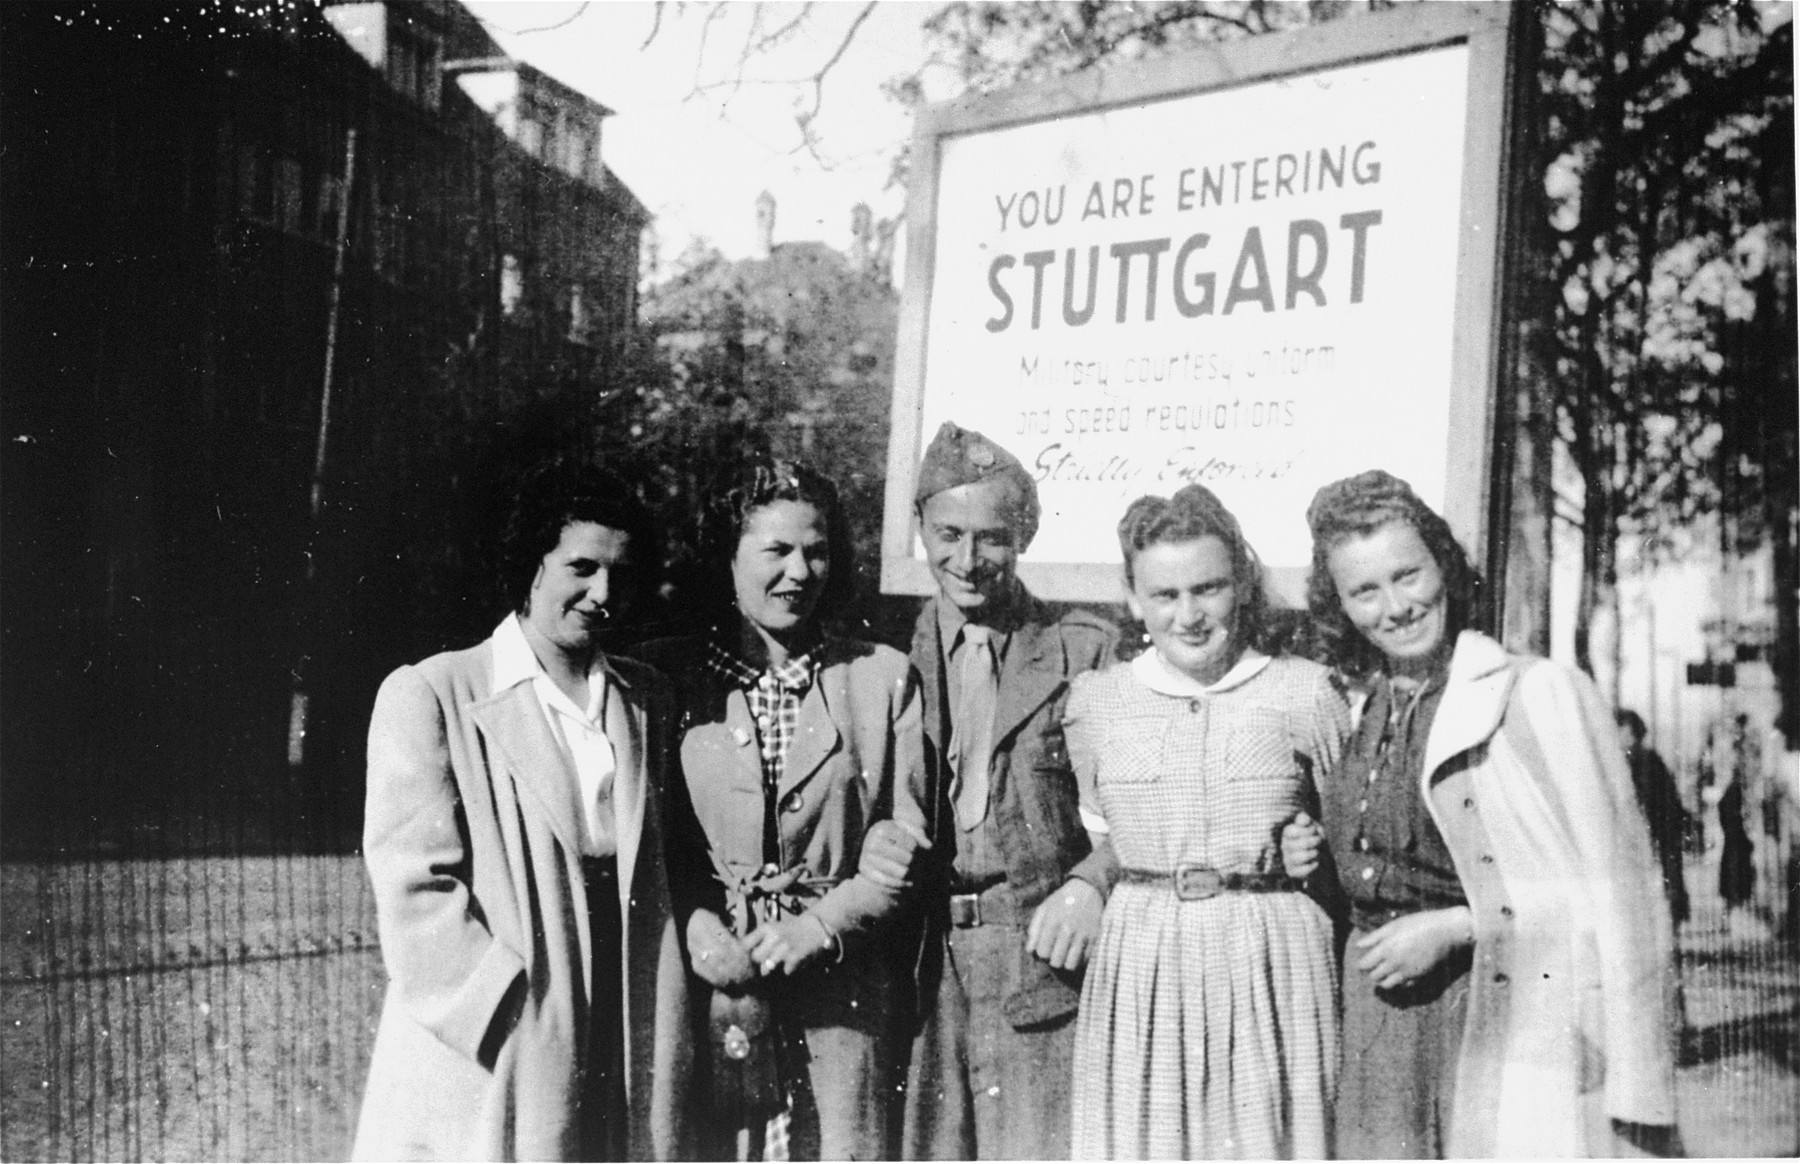 Henry Brauner with his wife, Esther (second from the right), and three friends at the entrance to the Stuttgart displaced persons camp.